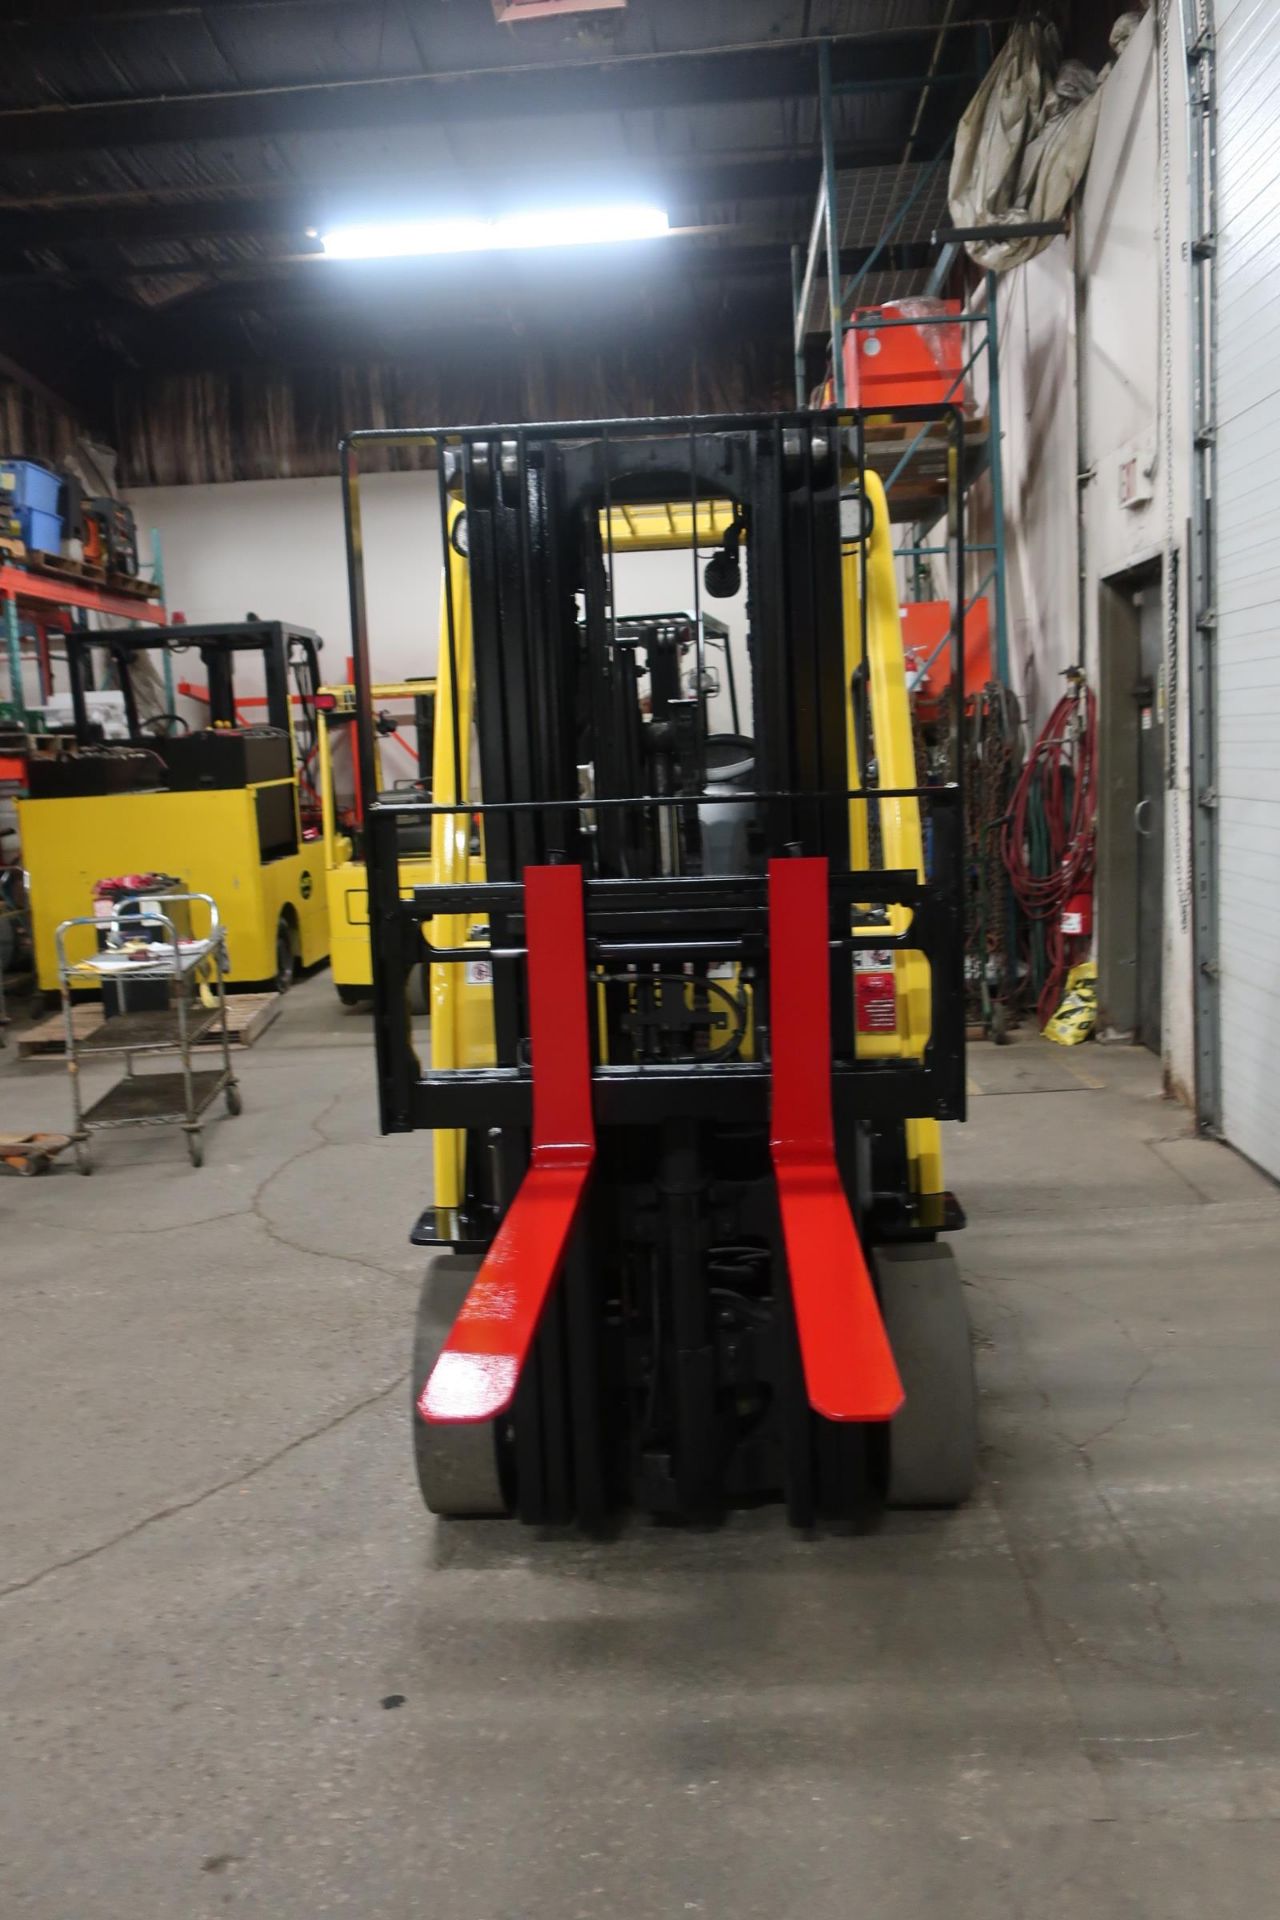 FREE CUSTOMS - 2012 Hyster 5000lbs Capacity Forklift with 3-stage mast - LPG (propane) with - Image 2 of 2